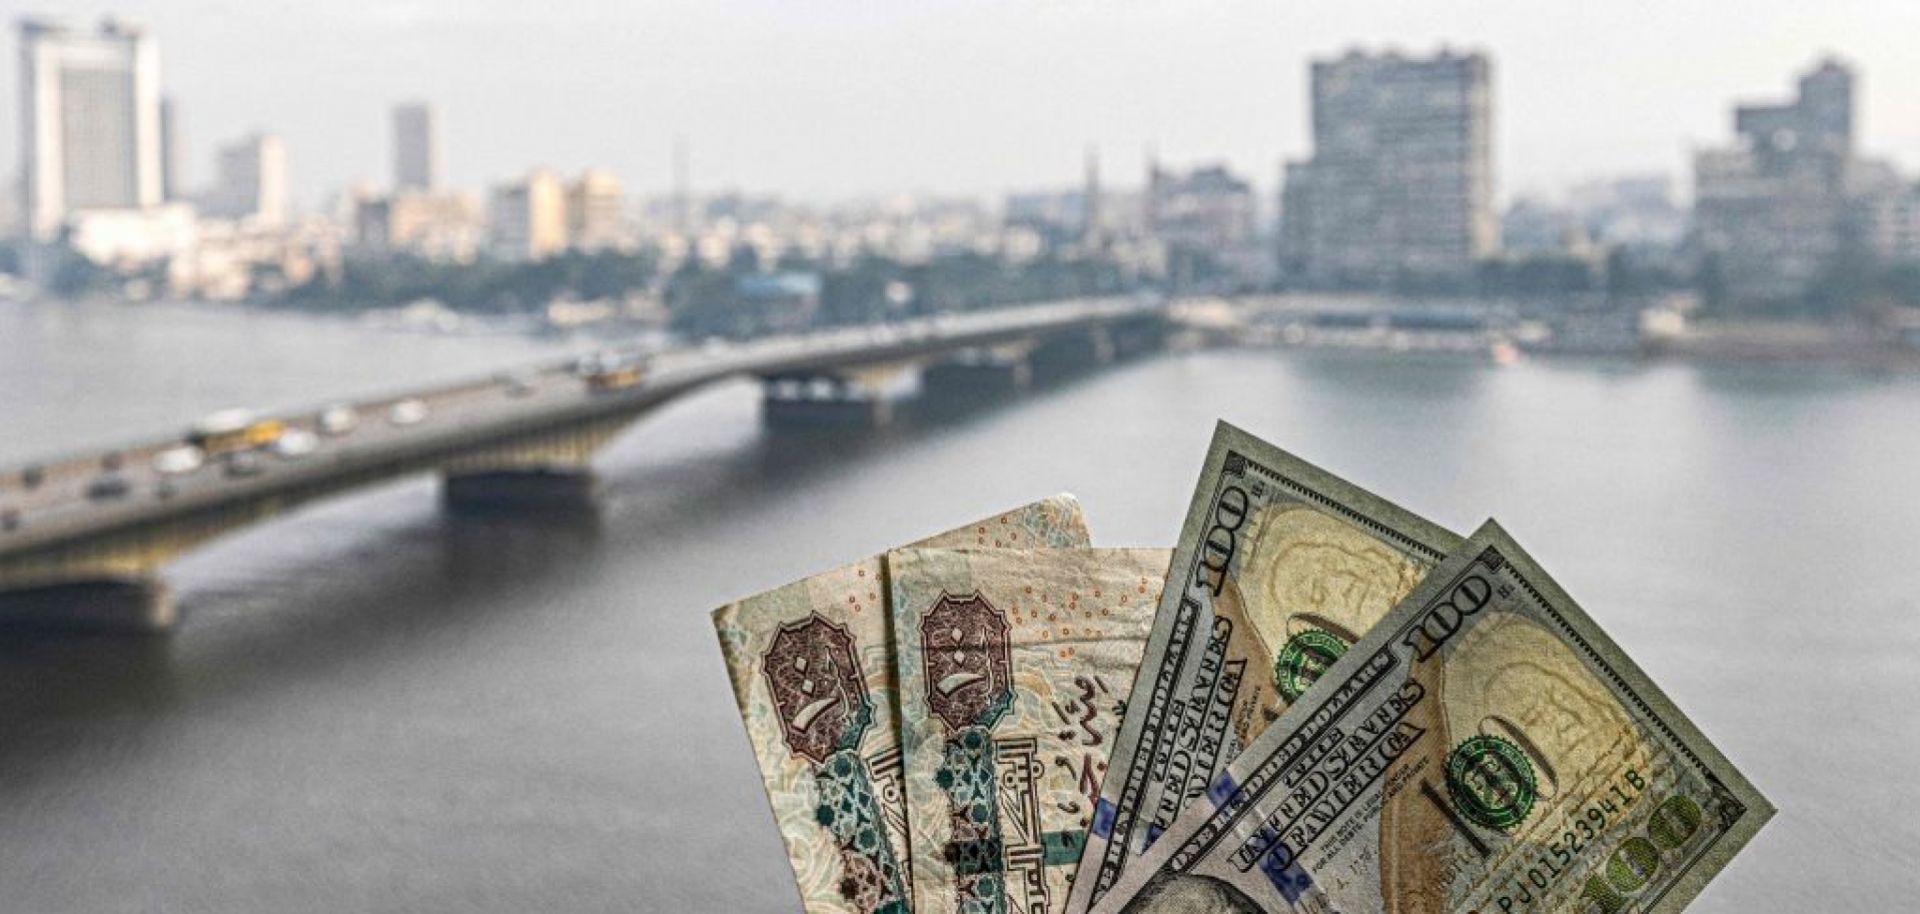 Two pairs of U.S. hundred dollar bills and Egyptian hundred pound notes are held before a window showing the skyline of Egypt's capital Cairo and the Nile River on Jan. 16, 2023.